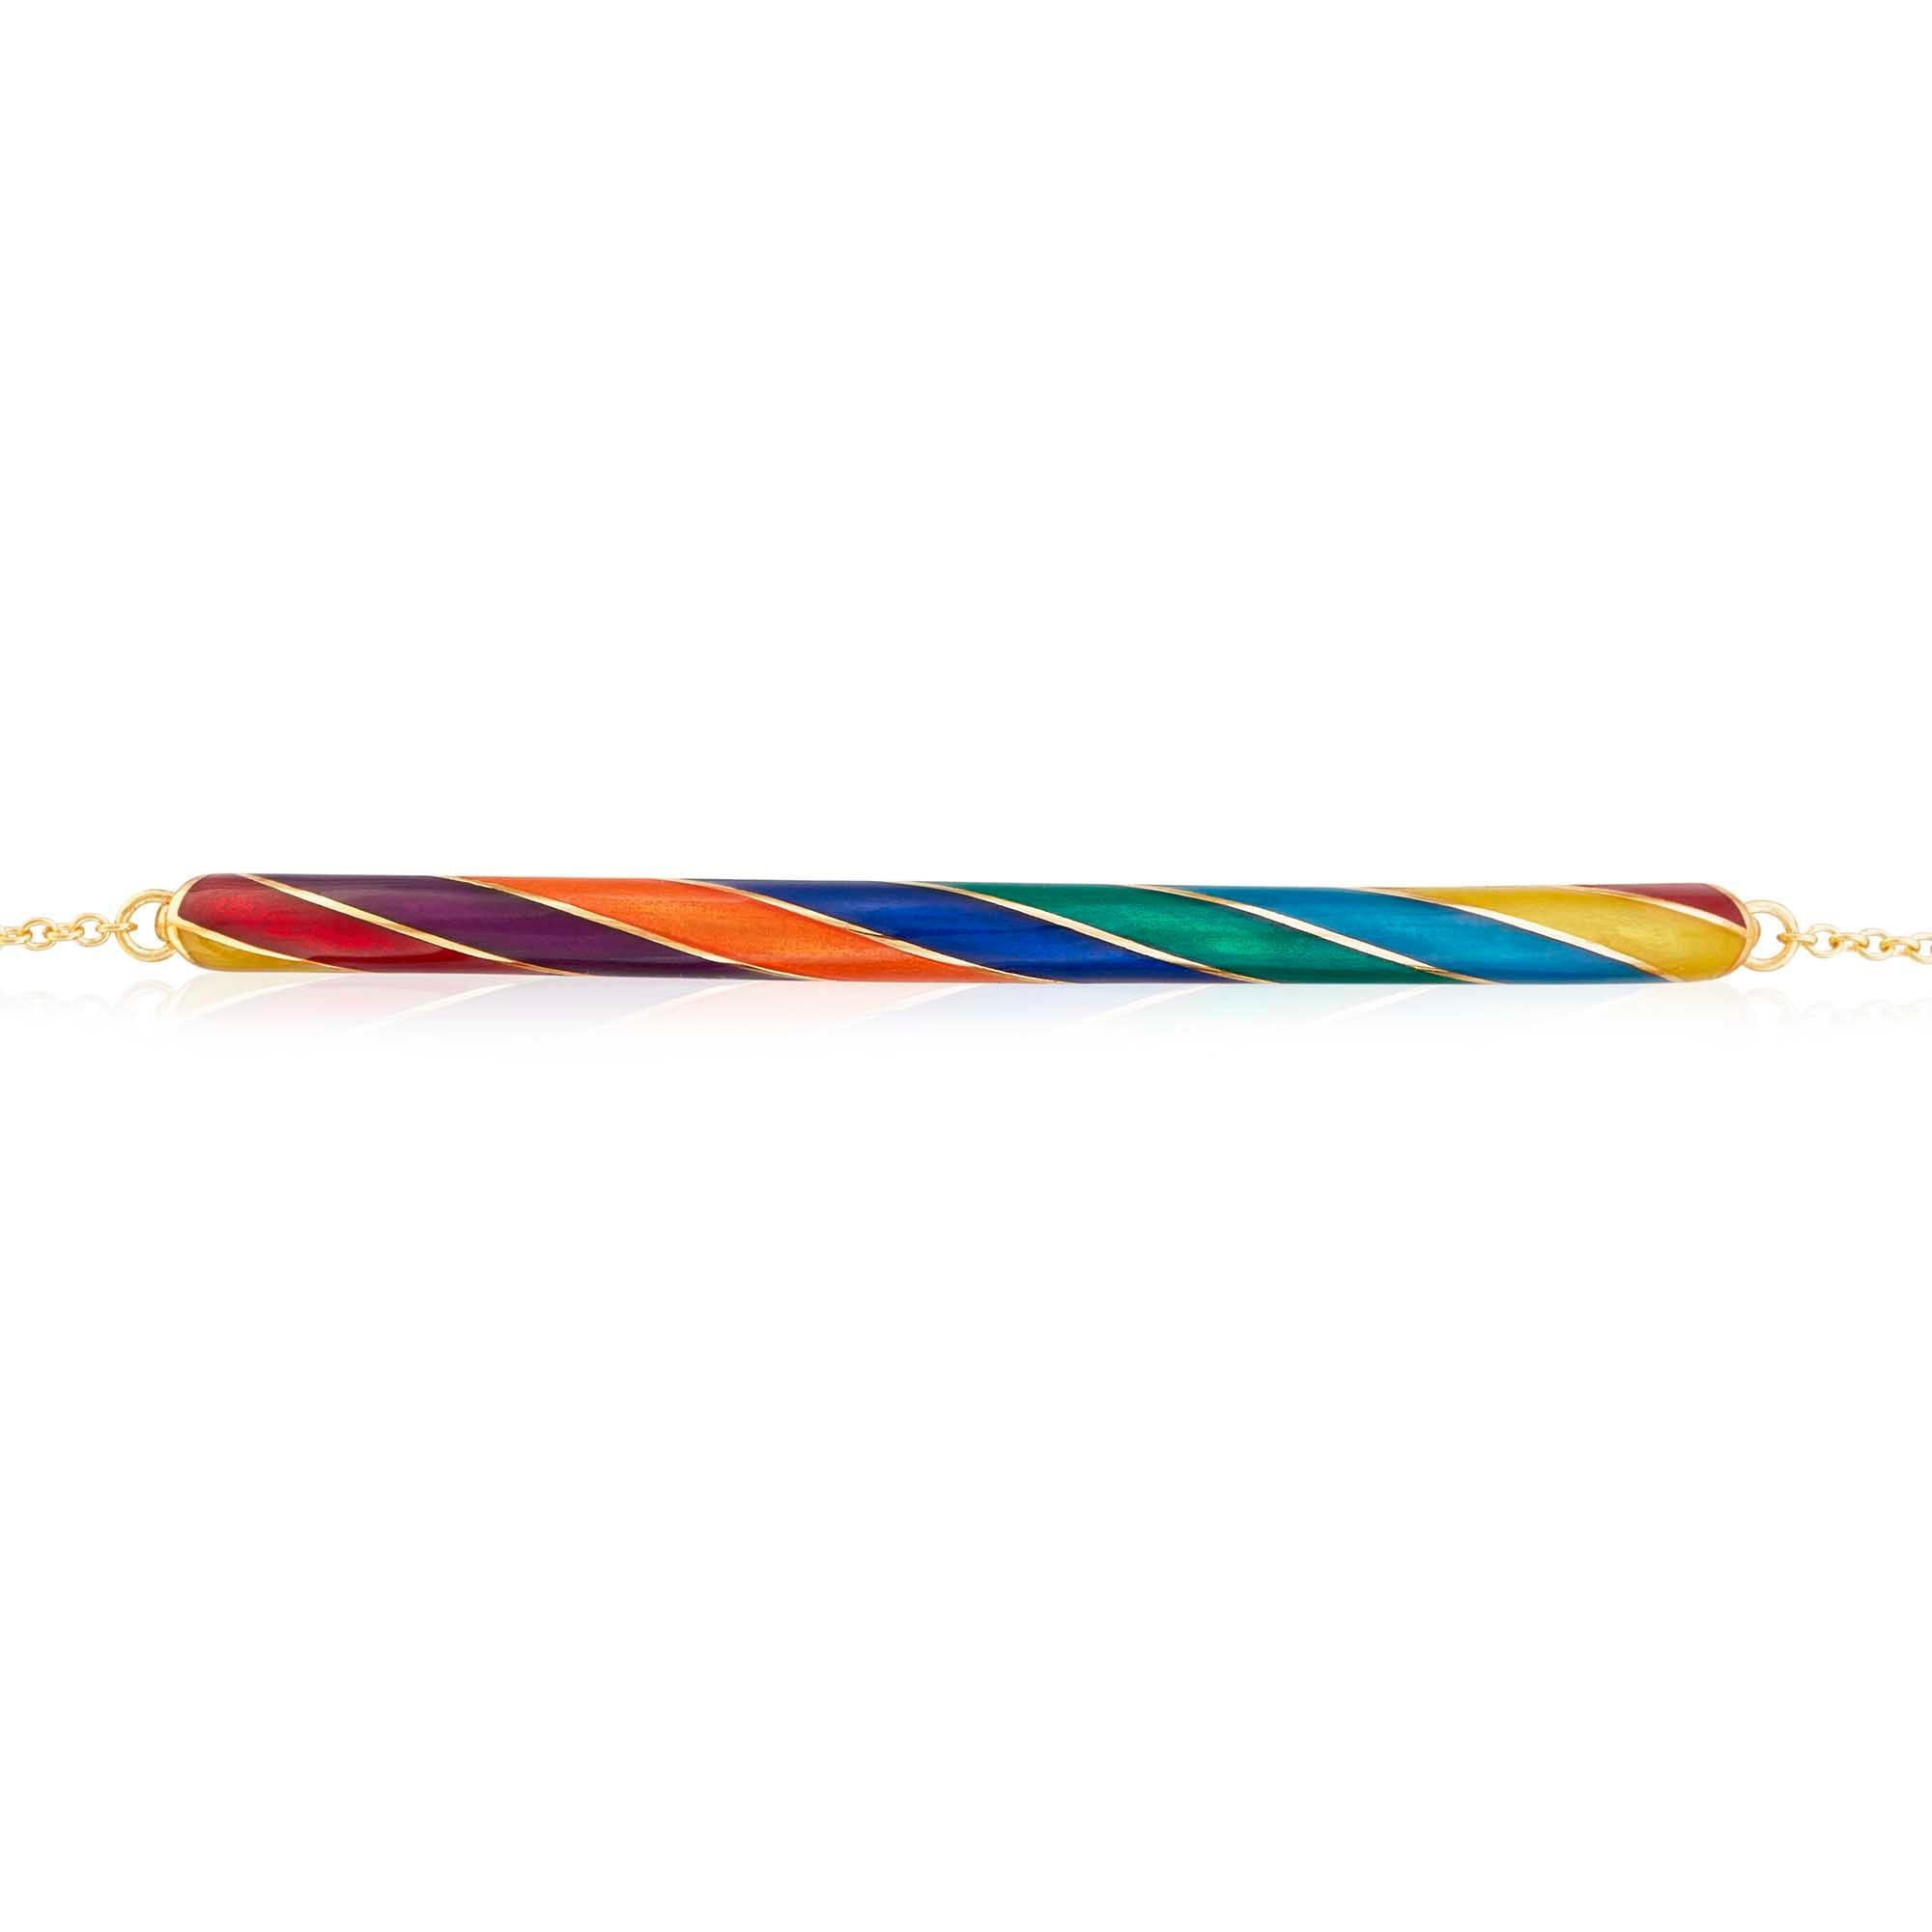 Indulge your senses with the mesmerizing swirls of rock candy brought to life in a bracelet that is almost good enough to eat! Prepare to adorn your wrist with a truly spectacular rainbow piece, meticulously handcrafted in 18ct yellow gold and cold